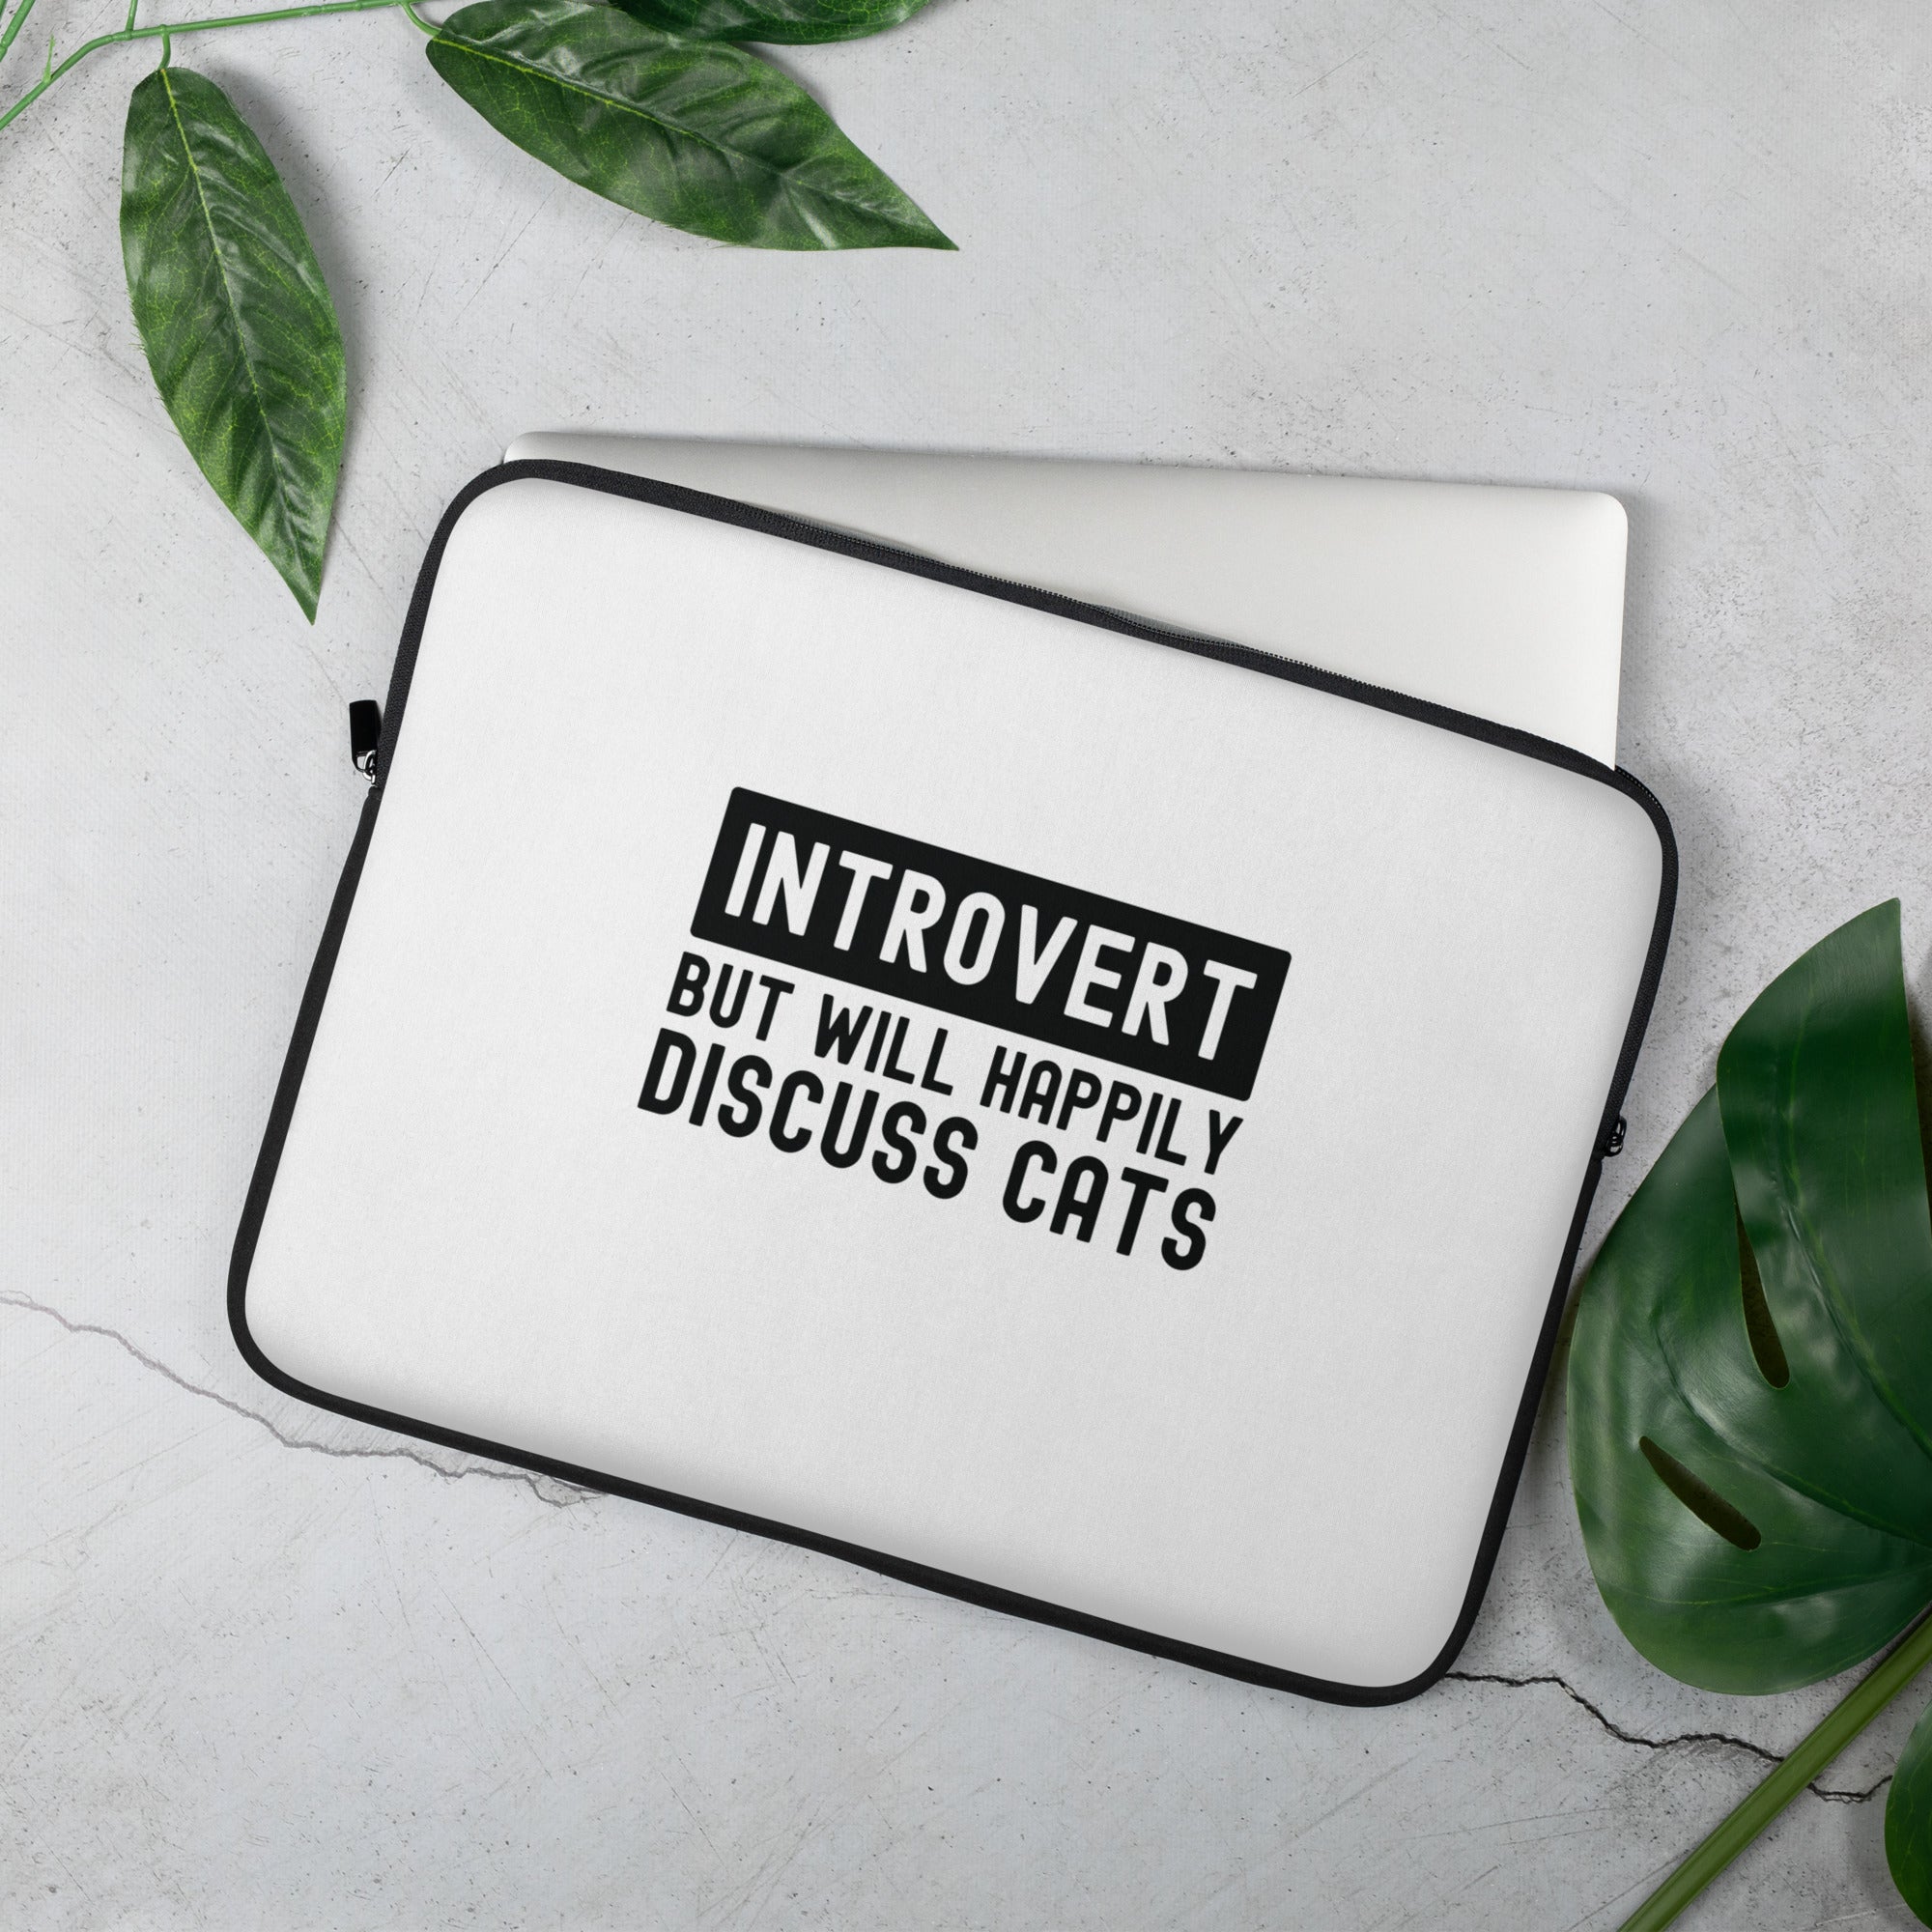 Laptop Sleeve | Introvert but will happily discuss cats